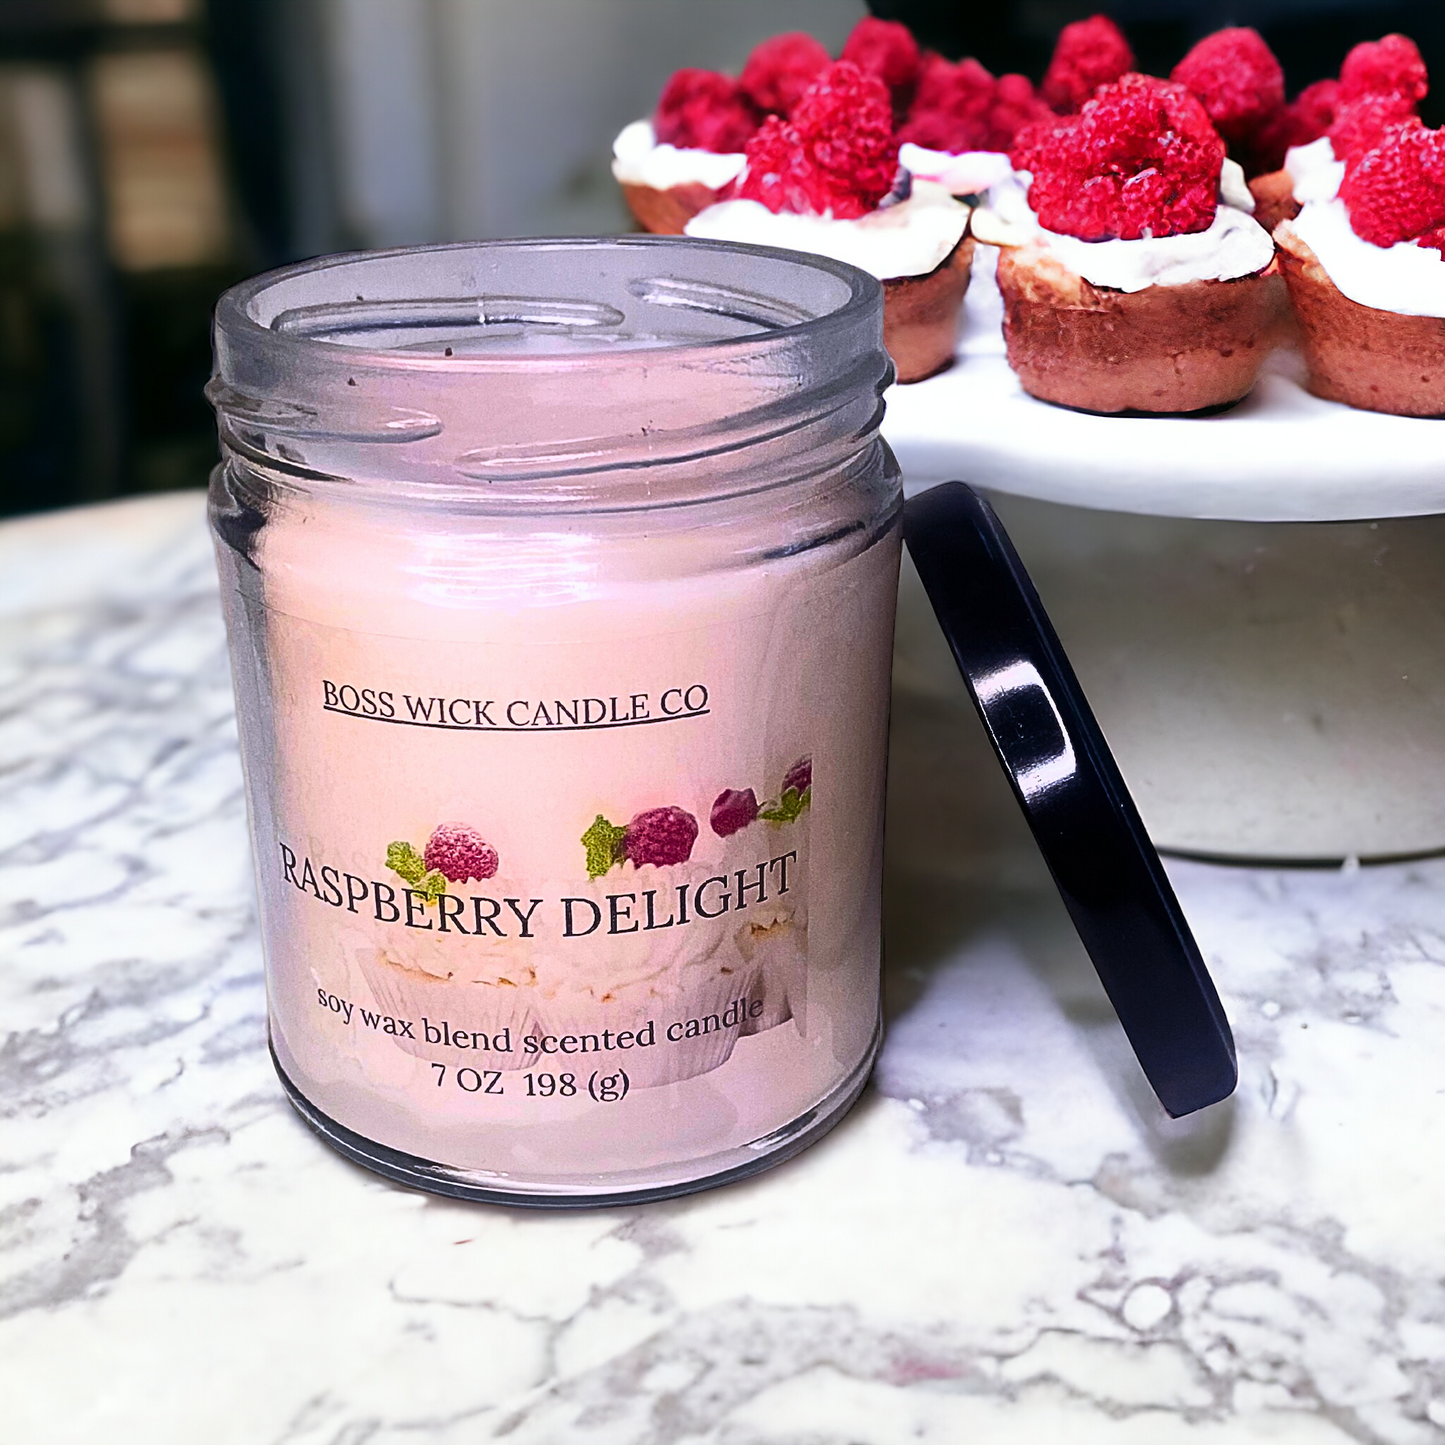 RASPBERRY DELIGHT CANDLE